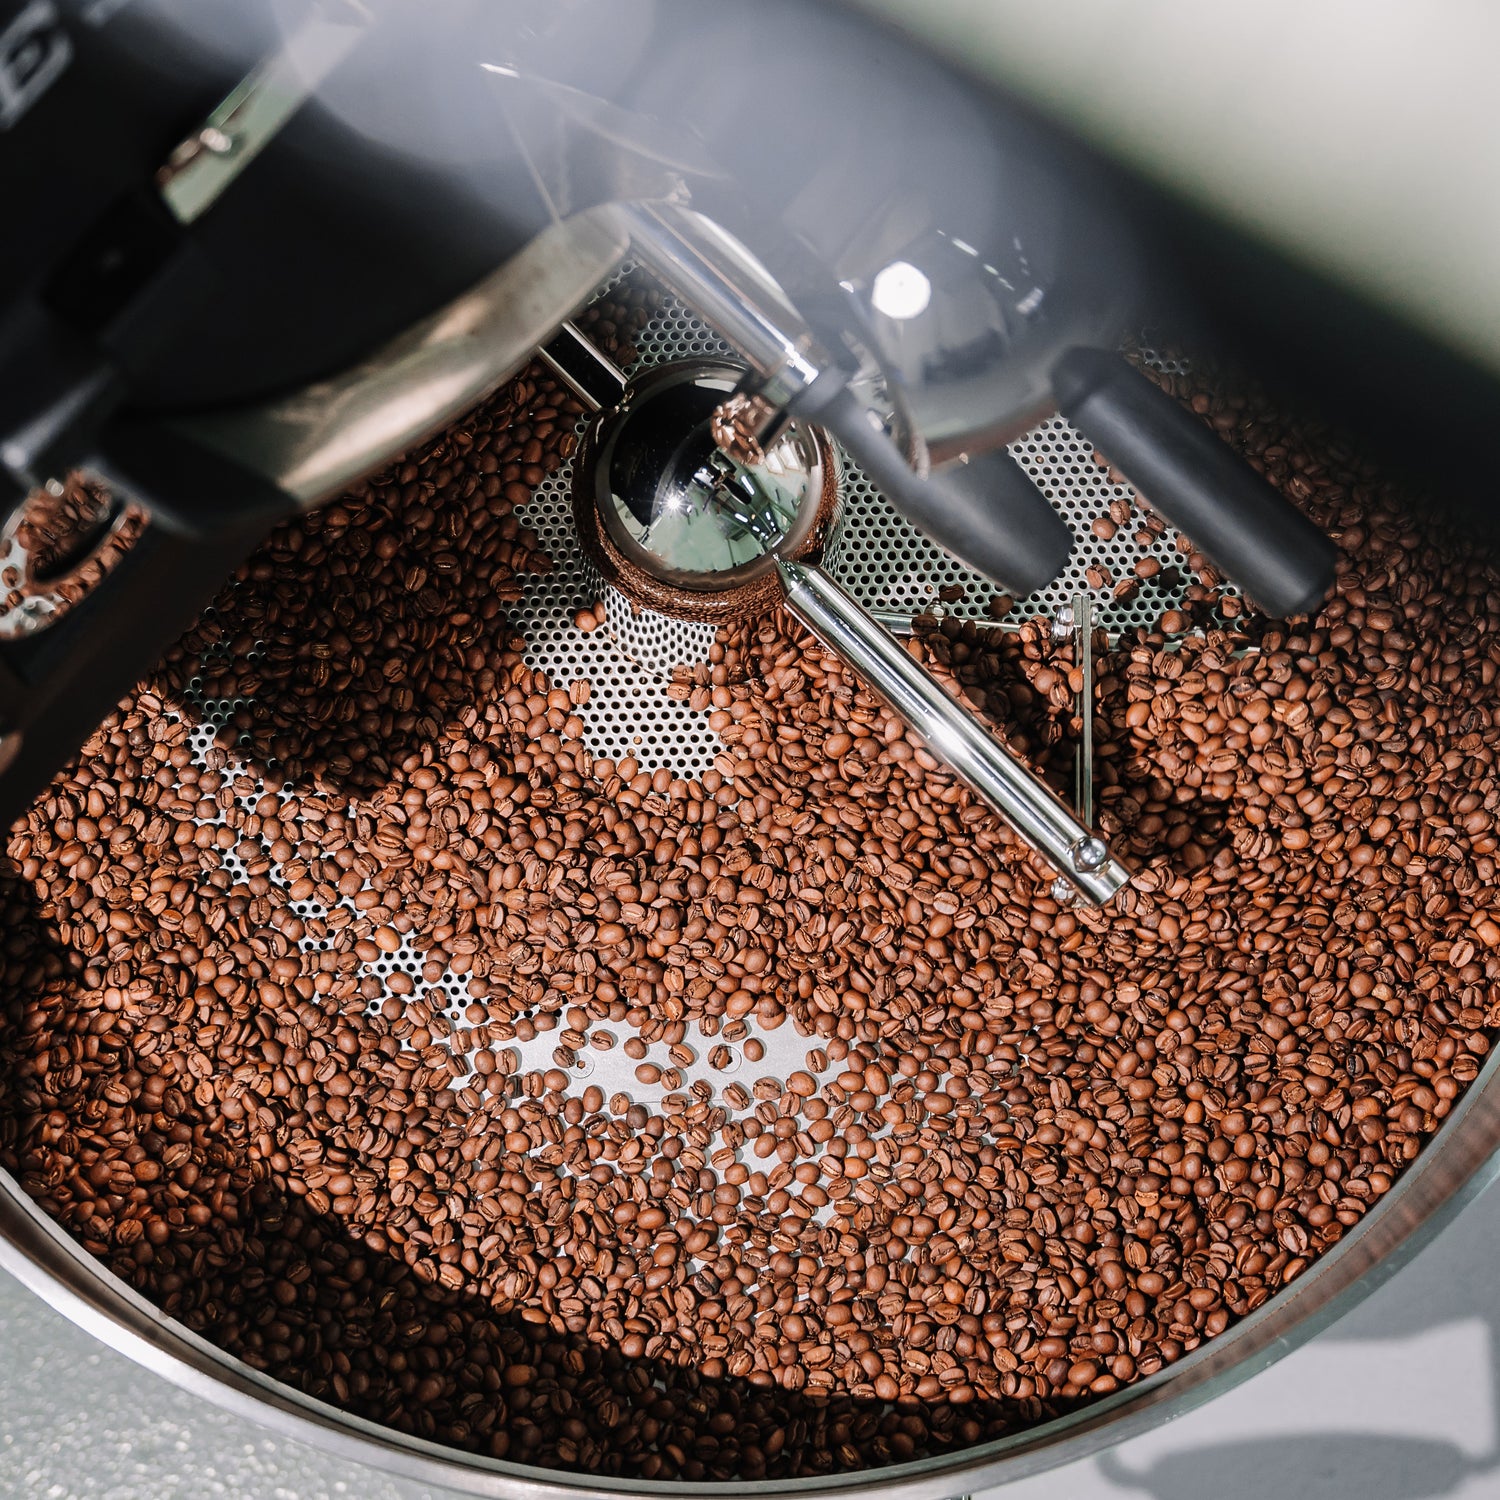 We roast our coffee differently for different brewing methods